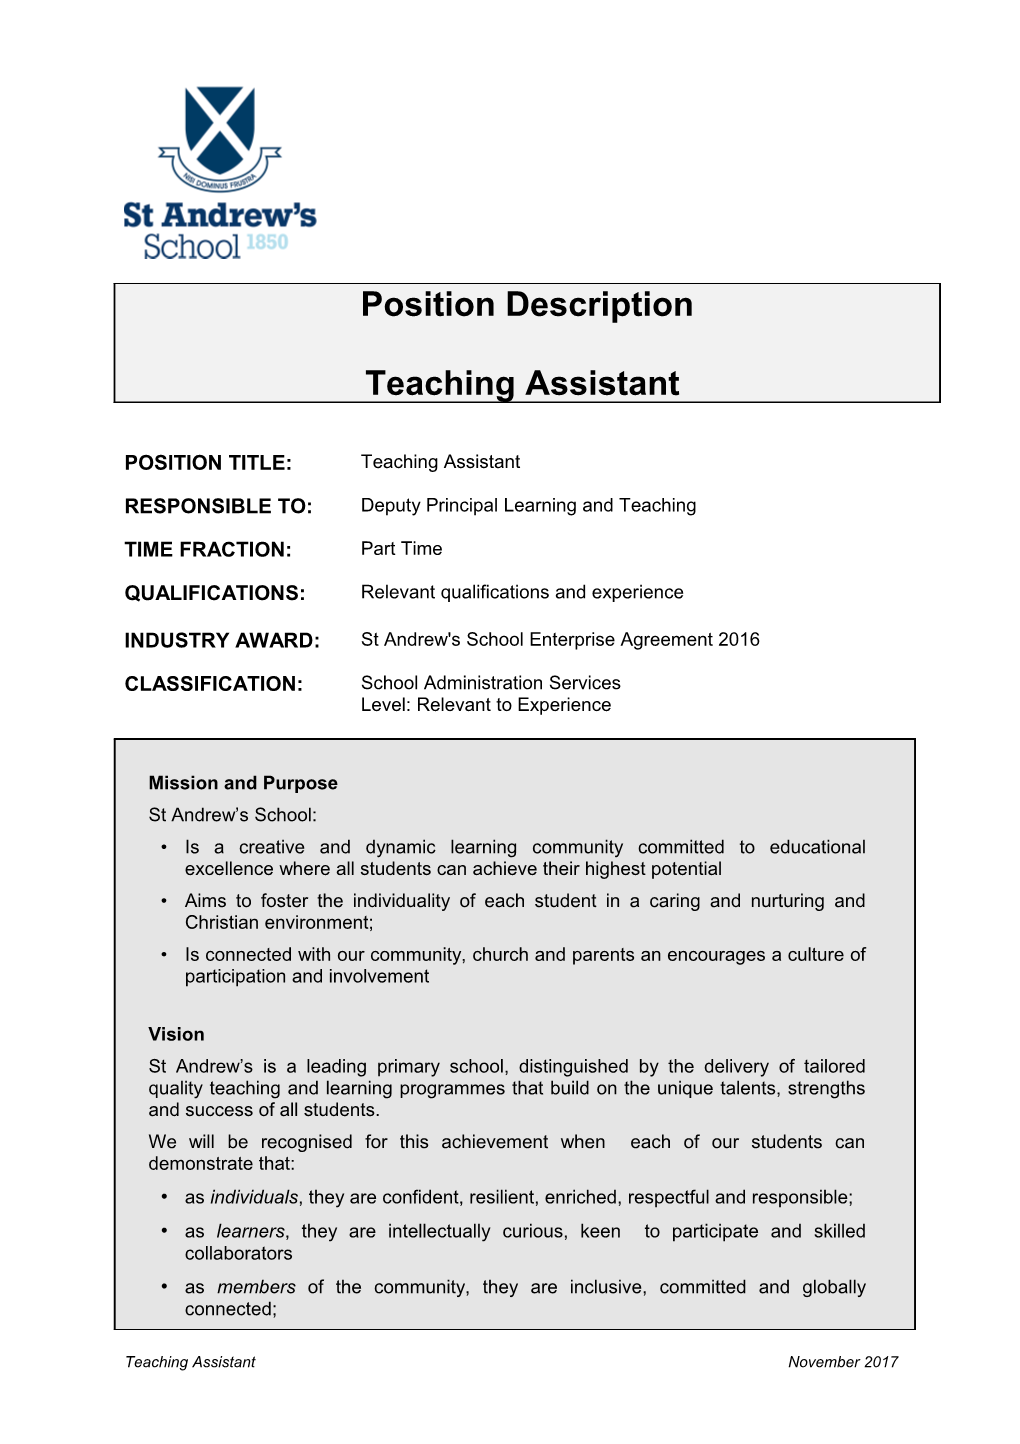 A Teacher Assistant Supports the Classroom Teacher by Working to Enhance the Effective